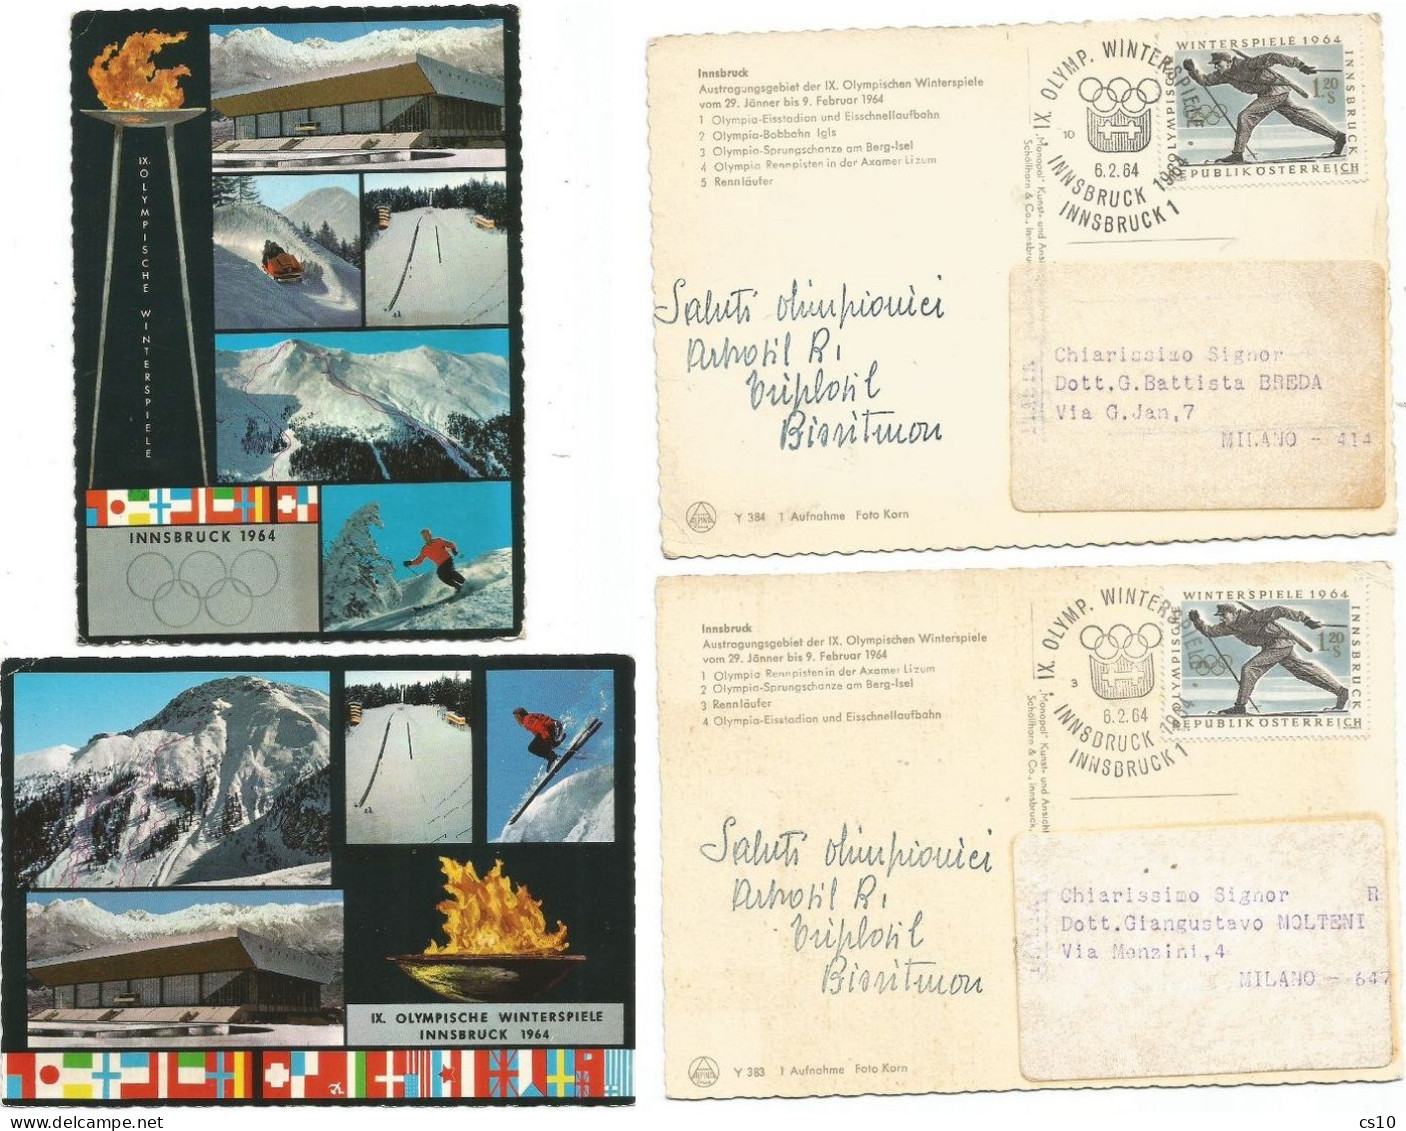 Winter Olympics 1964 Innsbruck Lot #4 Event Pcards With 3 Handsigns By Italian Athlets +# 2 ADV Promo Pcards Bioritmon - Jeux Olympiques